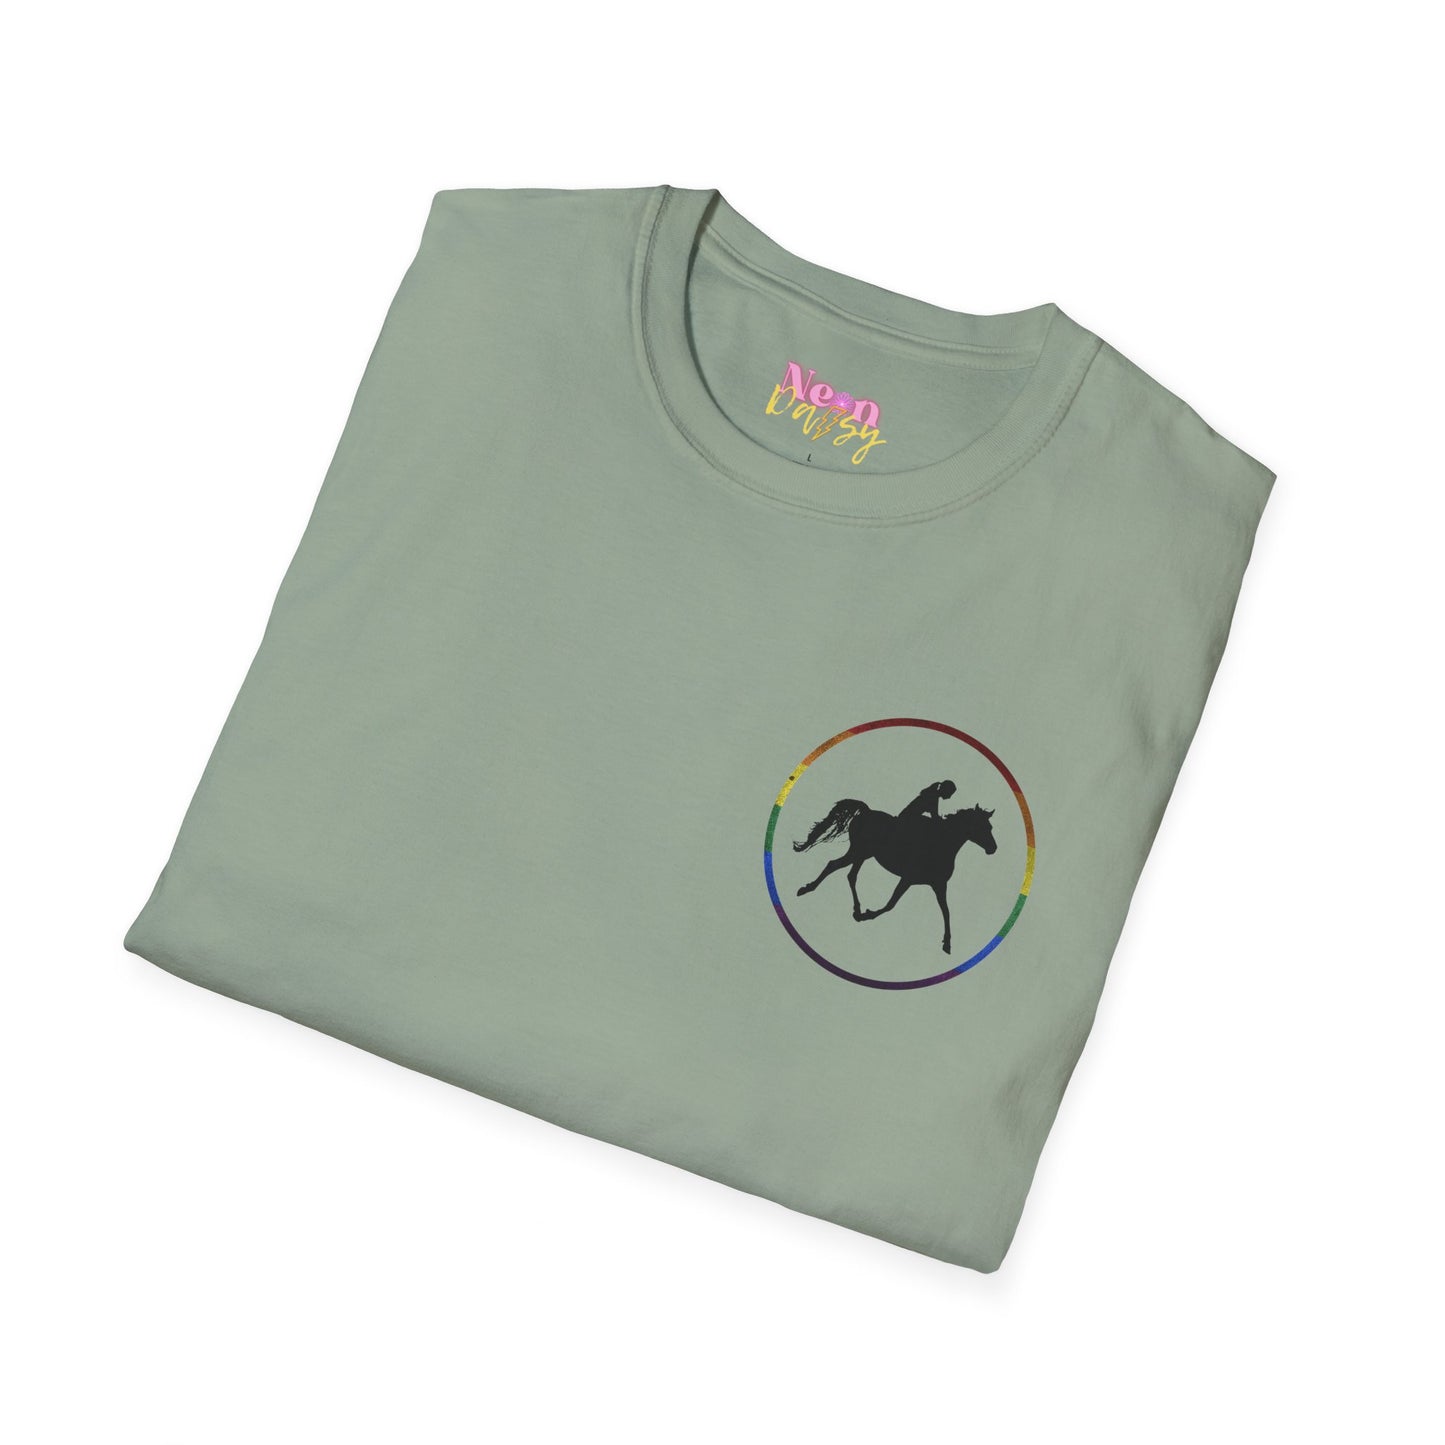 Equestrians for Equality // TEE